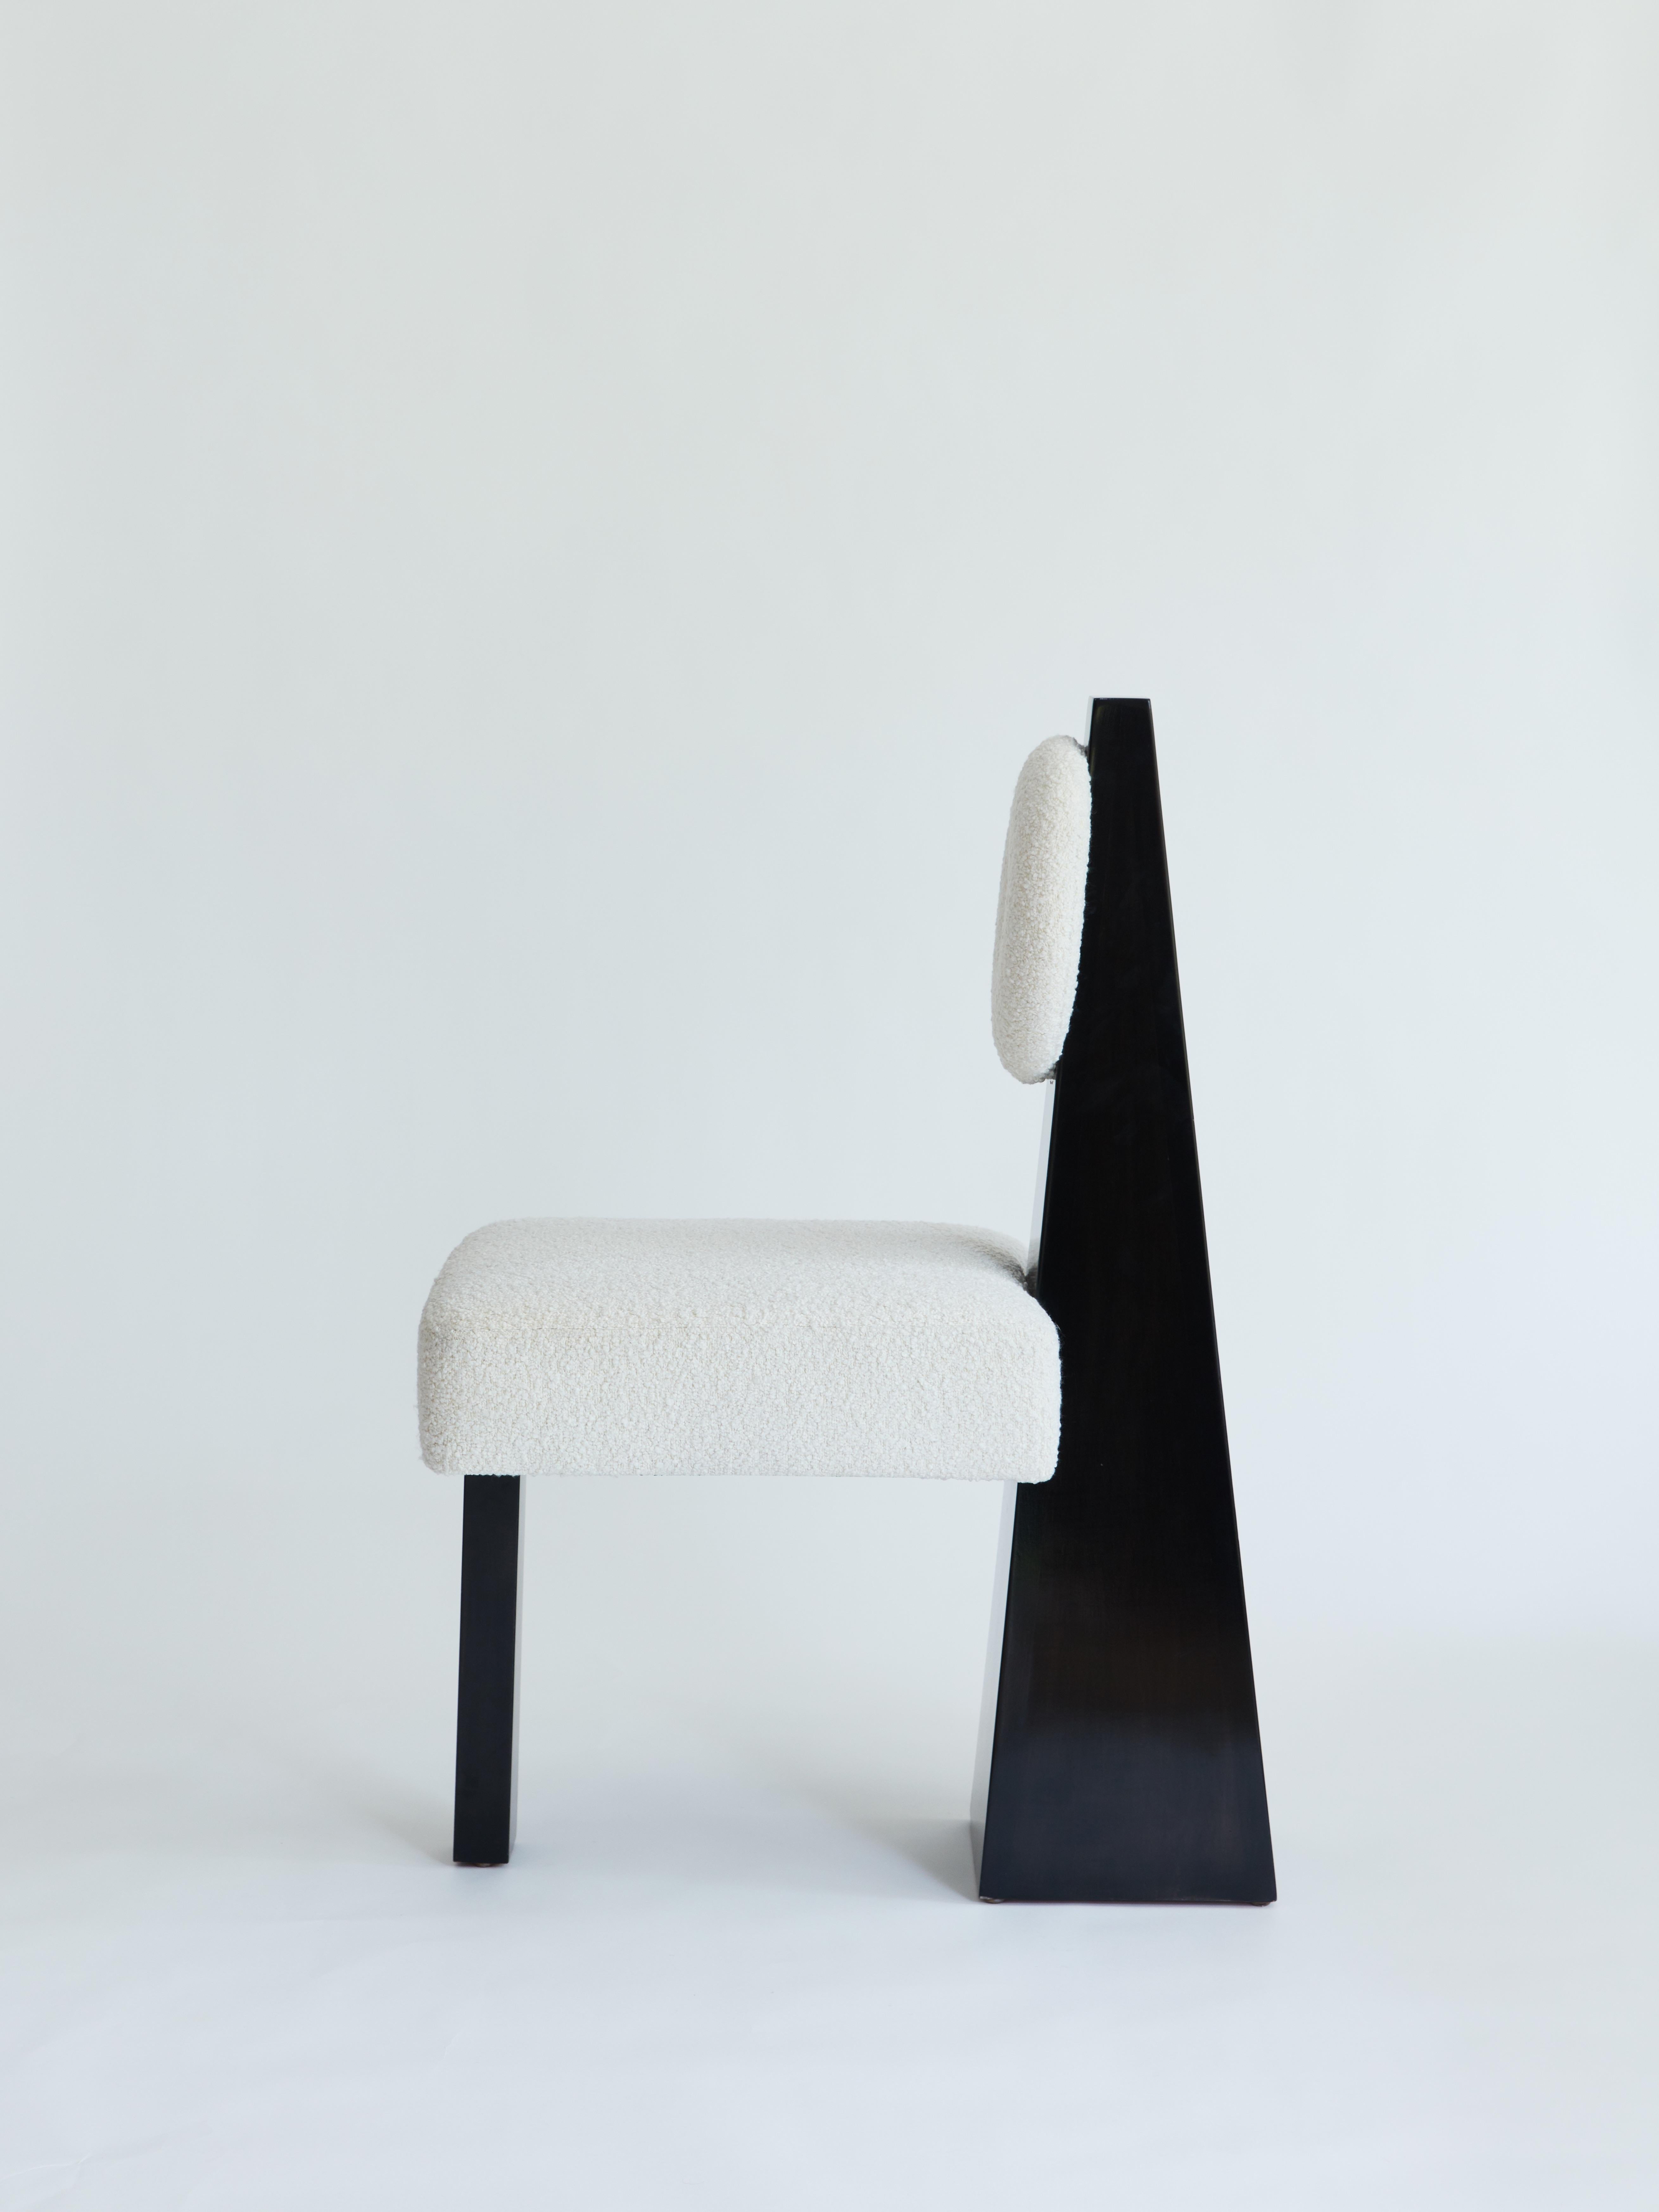 Made to order bouclé and wood chair designed by Christian Siriano.

Base: Black Lacquered Maple

Fabric for seat/back cushion: 
Ivory Bouclé

Overall Depth: 28”
Overall Height: 40”

Seat Depth: 21”
Seat Height: 20”
Seat Width: 19”.
 